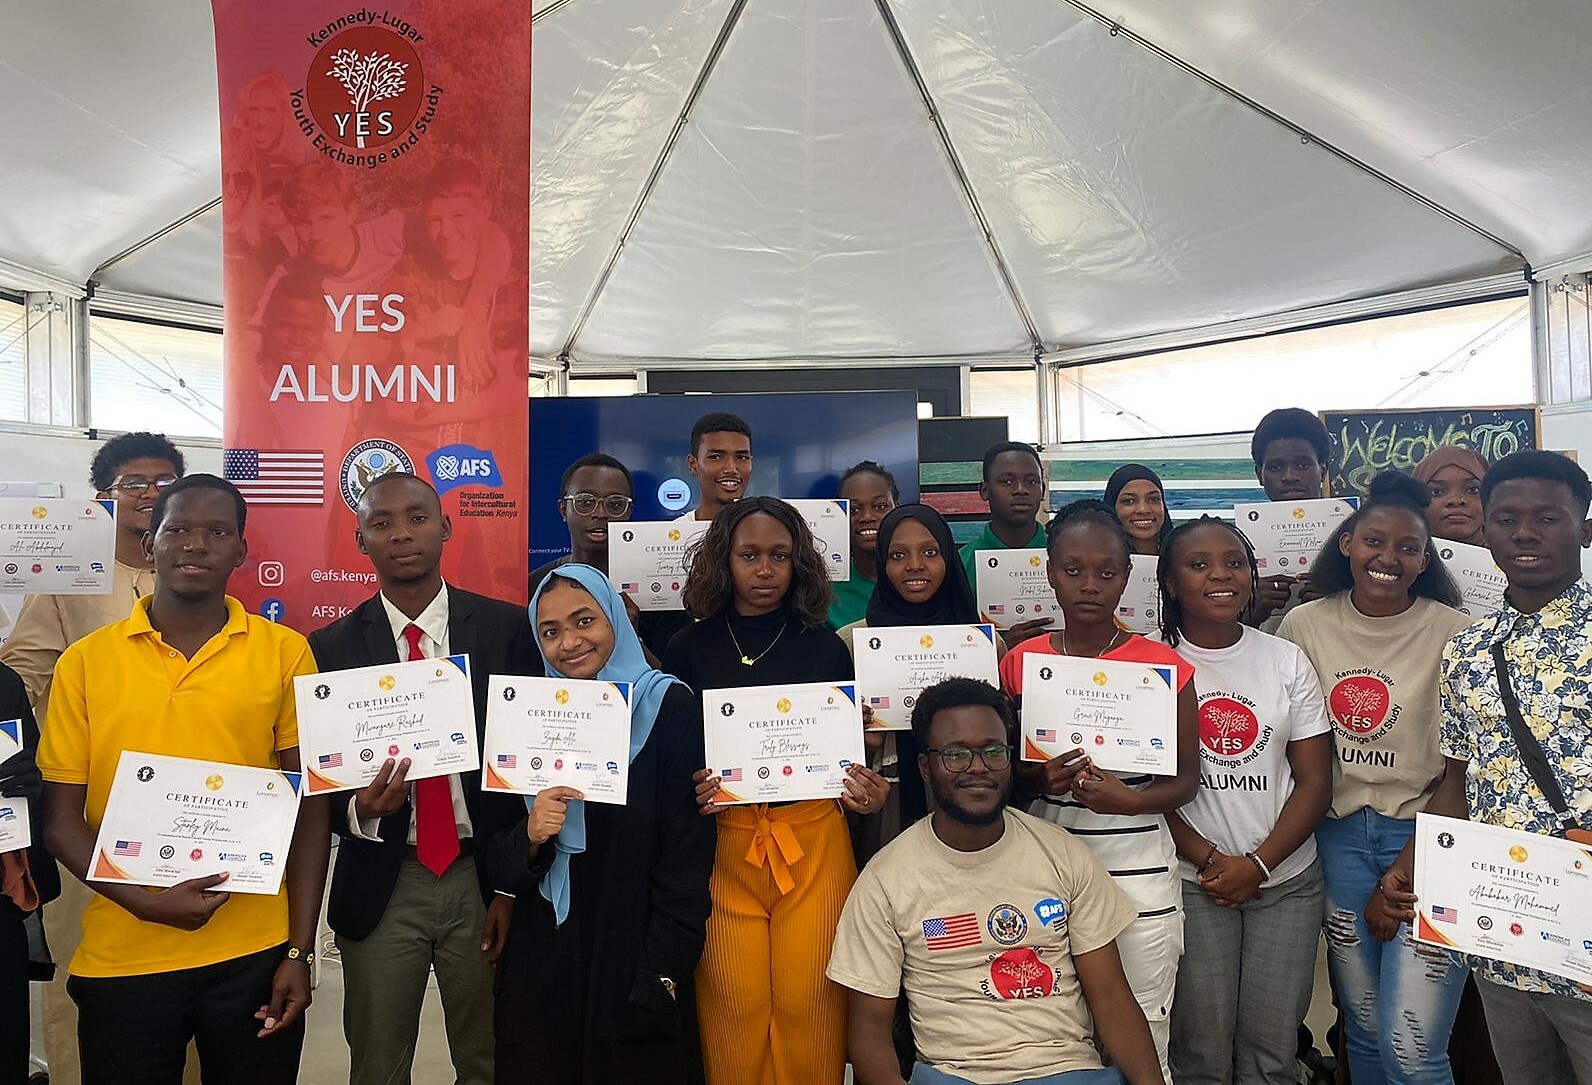 Group Photo Of Alumni And Participants With Their Certificates